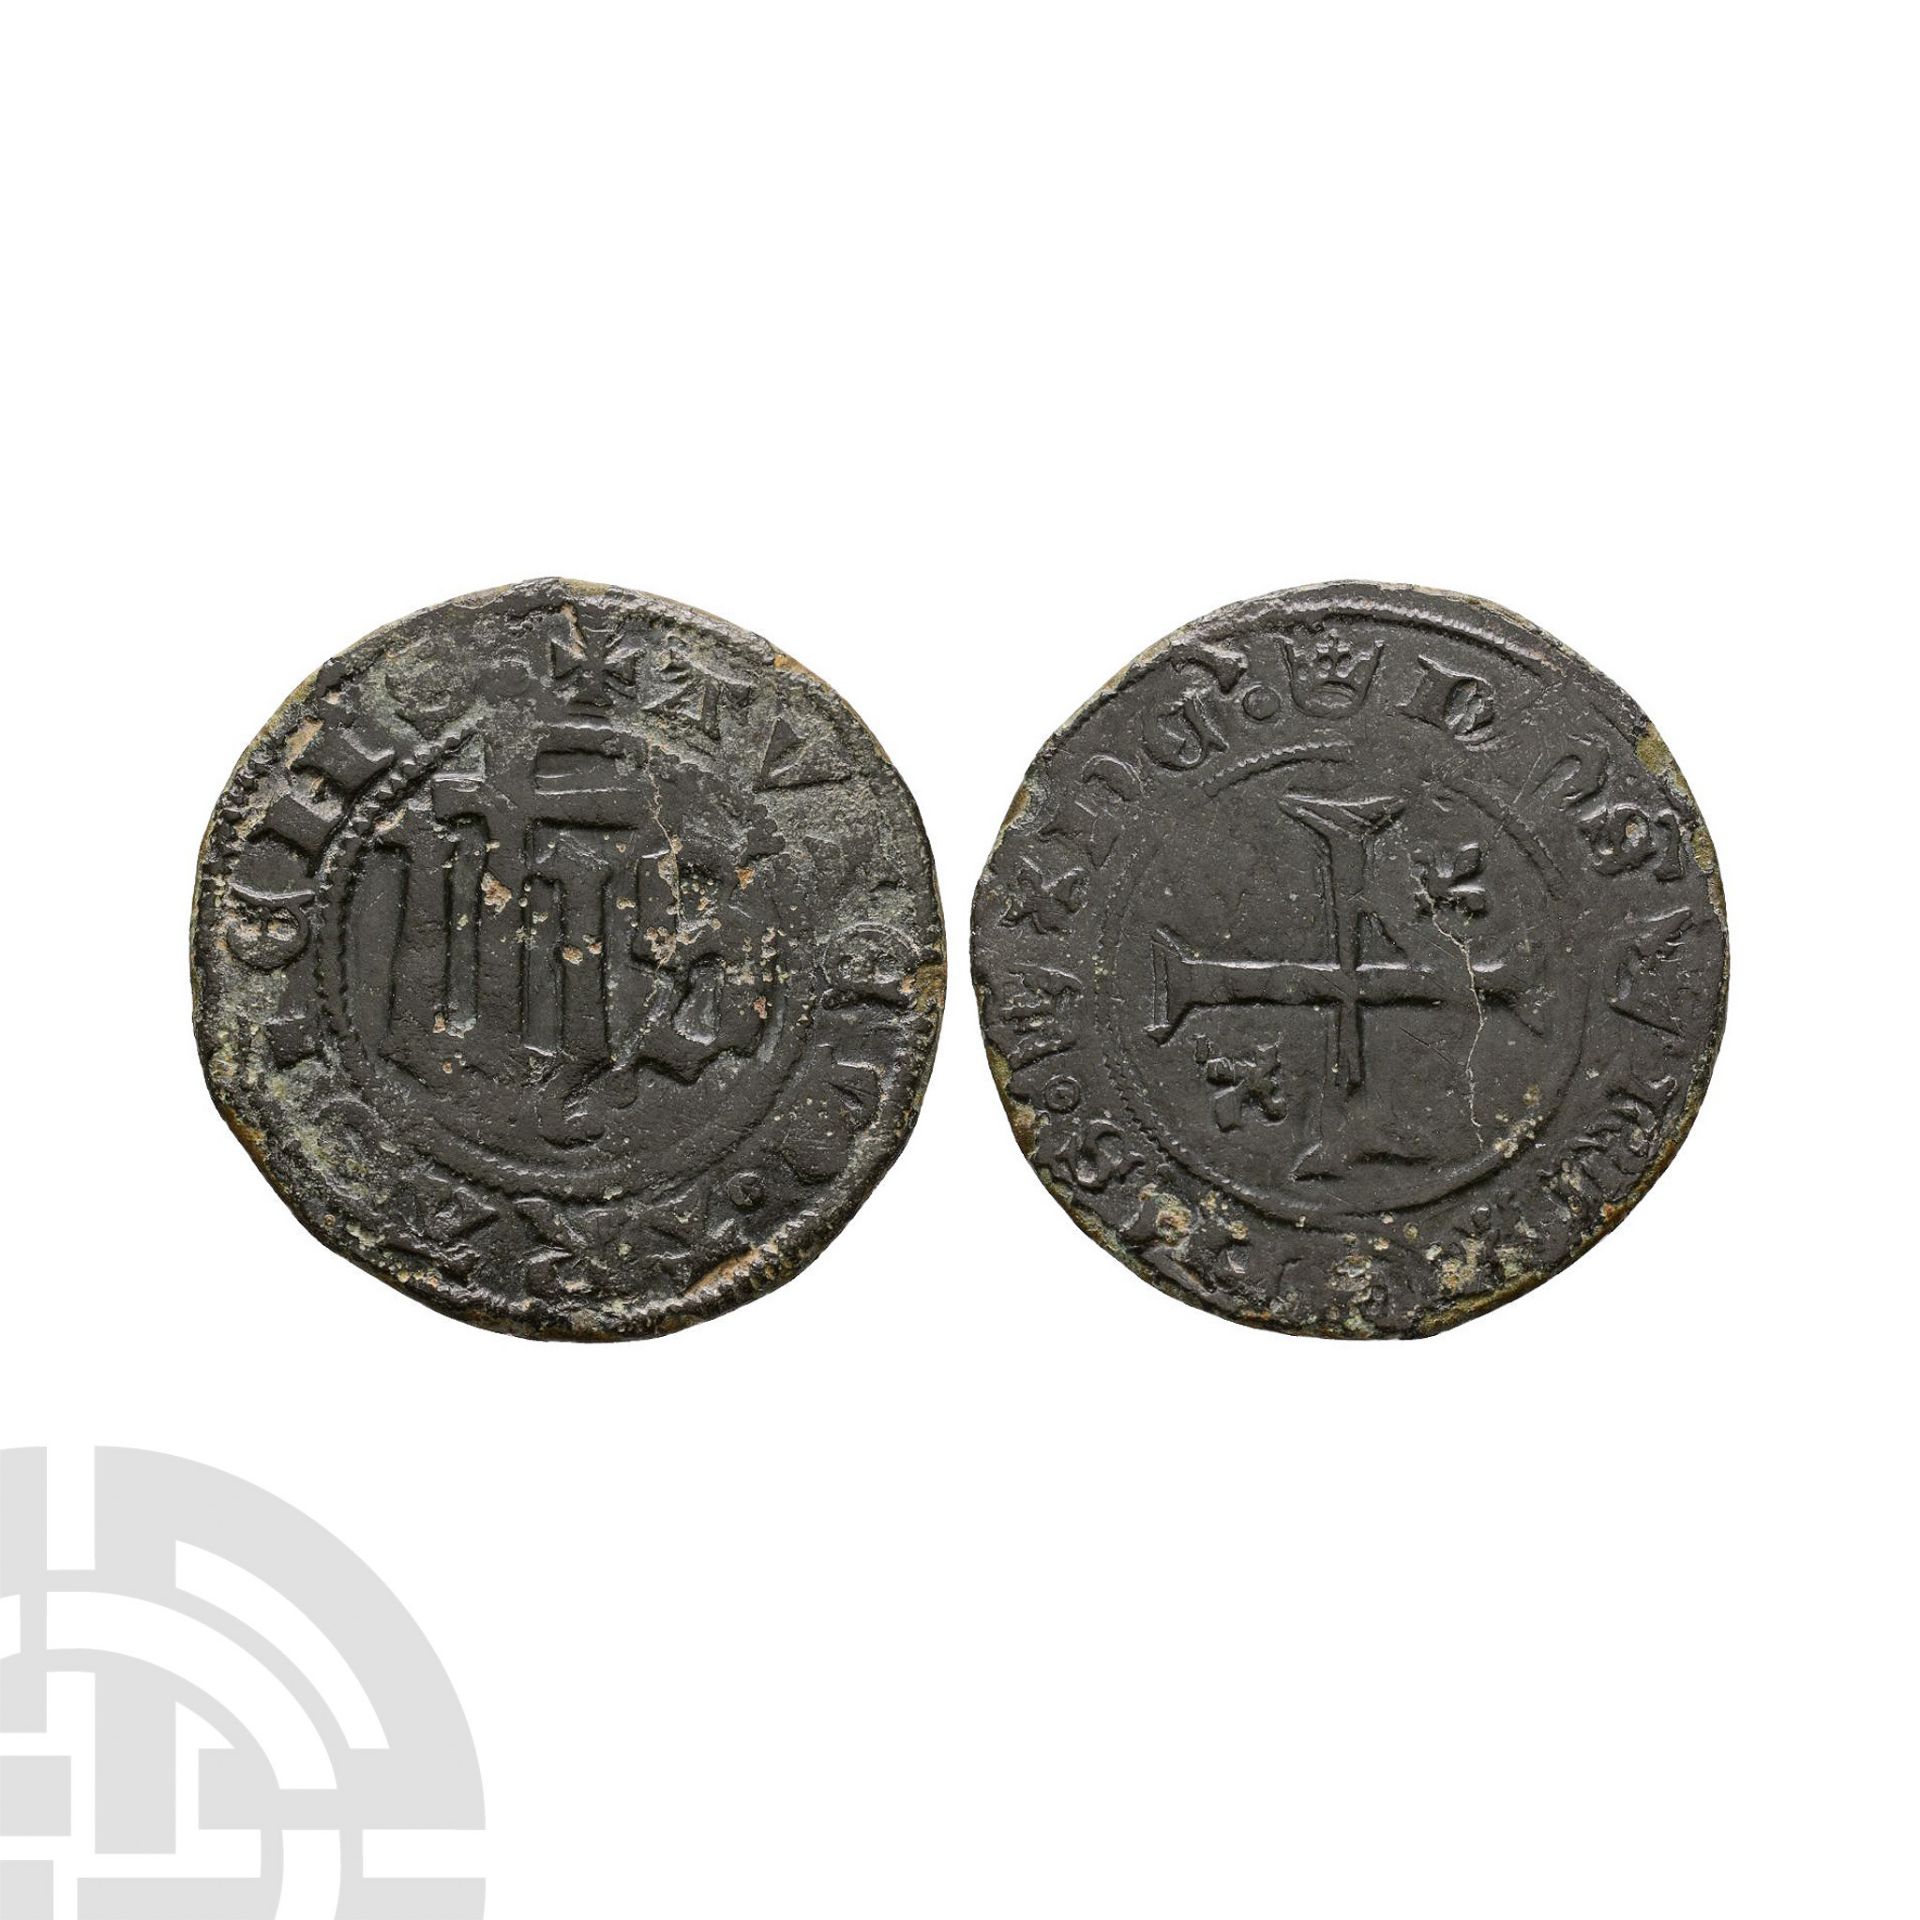 Tokens - France - IHS - AE Jetton